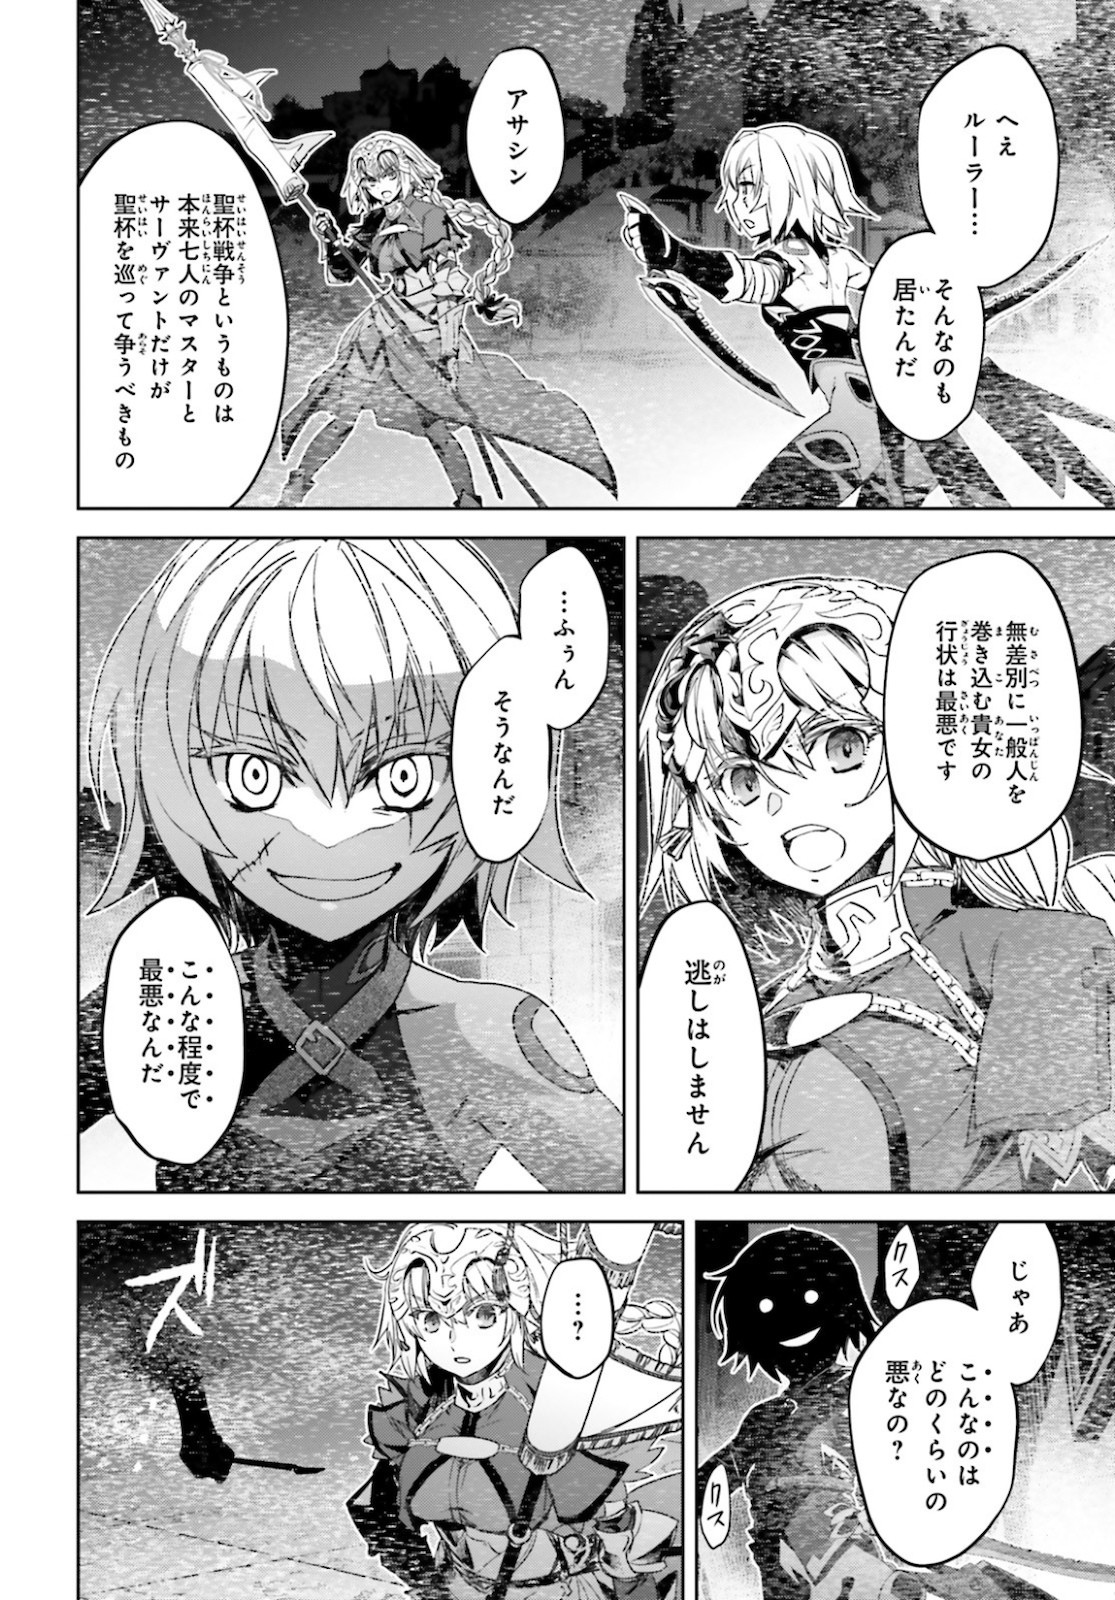 Fate-Apocrypha - Chapter 48 - Page 3